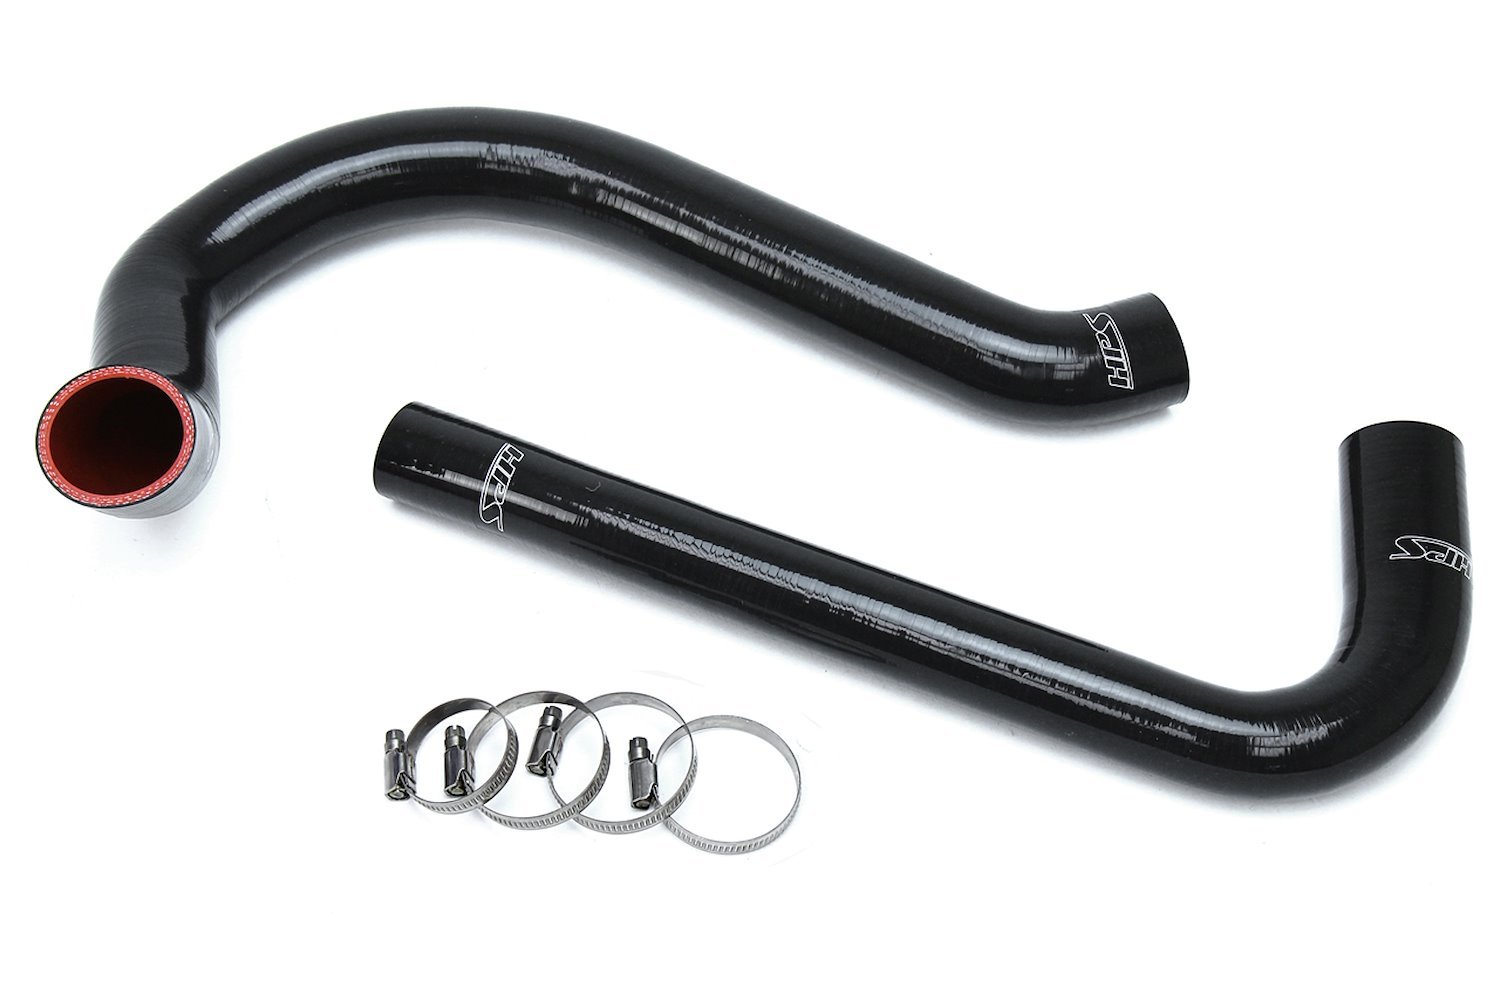 57-1627-BLK Radiator Hose Kit, High-Temp 3-Ply Reinforced Silicone, Replace OEM Rubber Radiator Coolant Hoses